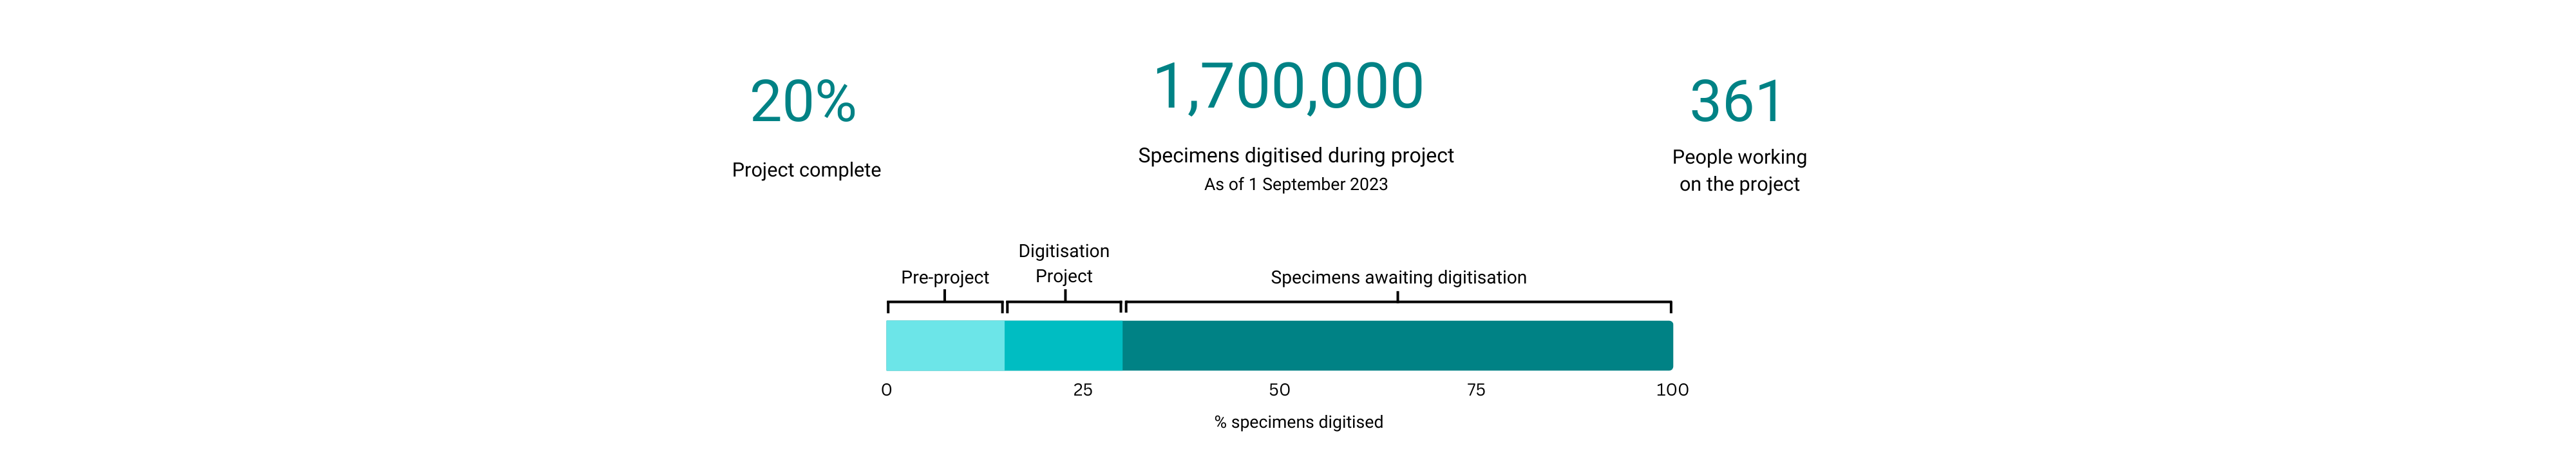 Graphic showing the Digitisation Project numbers to date, including that 1.5 million specimens have been digitised.